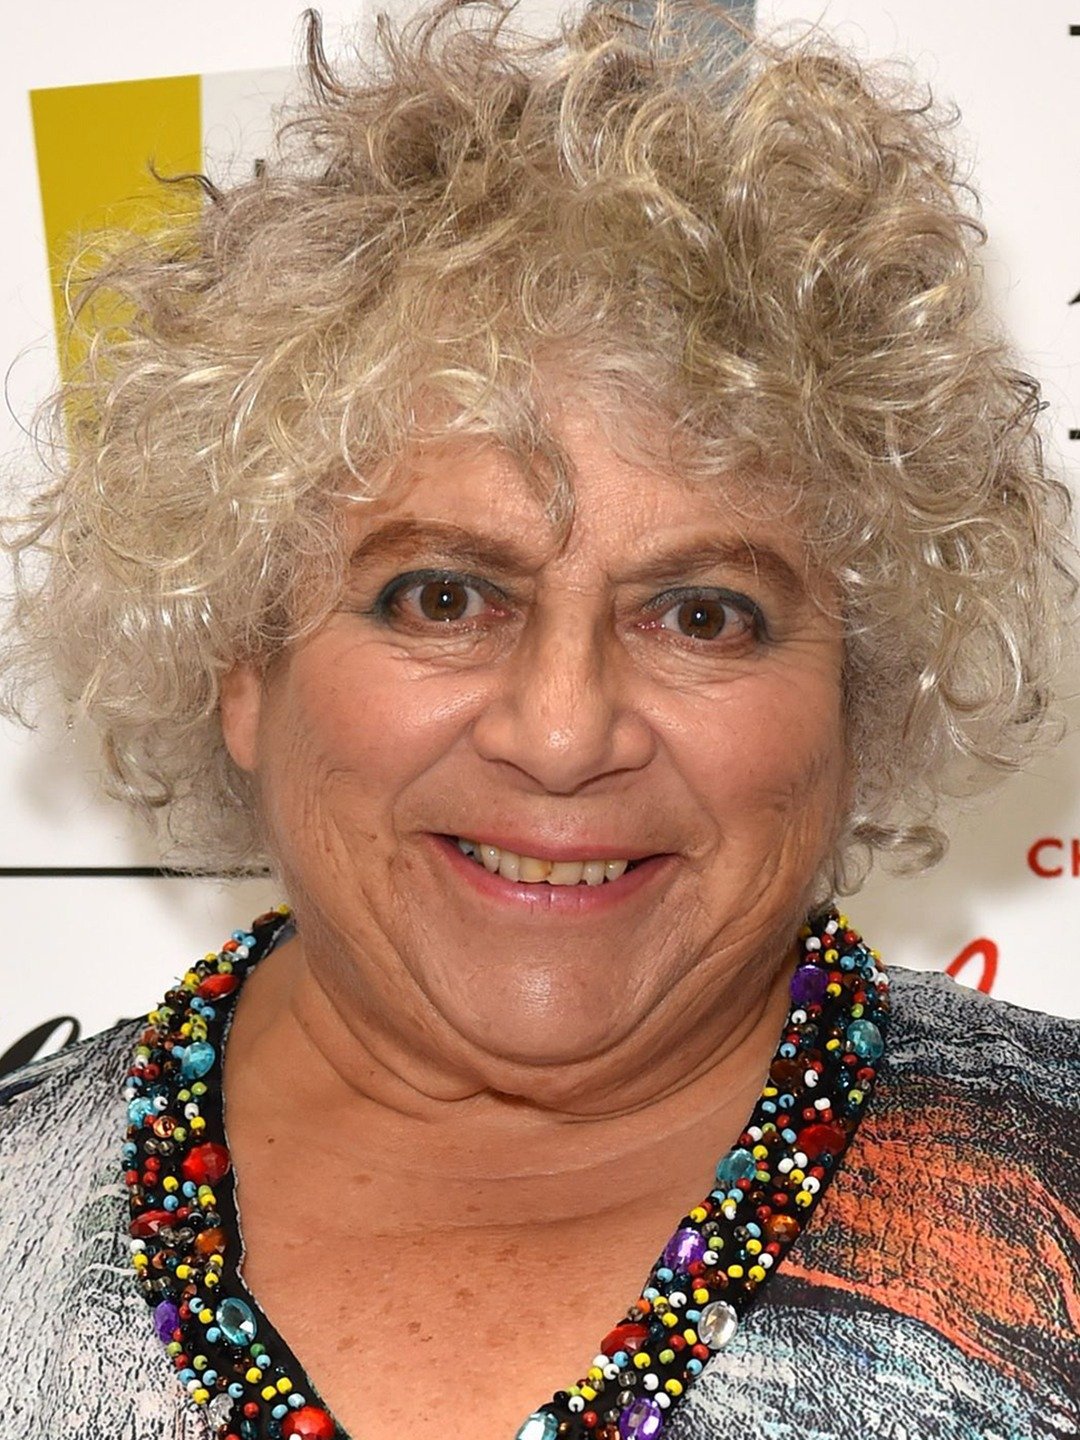 How tall is Miriam Margolyes?